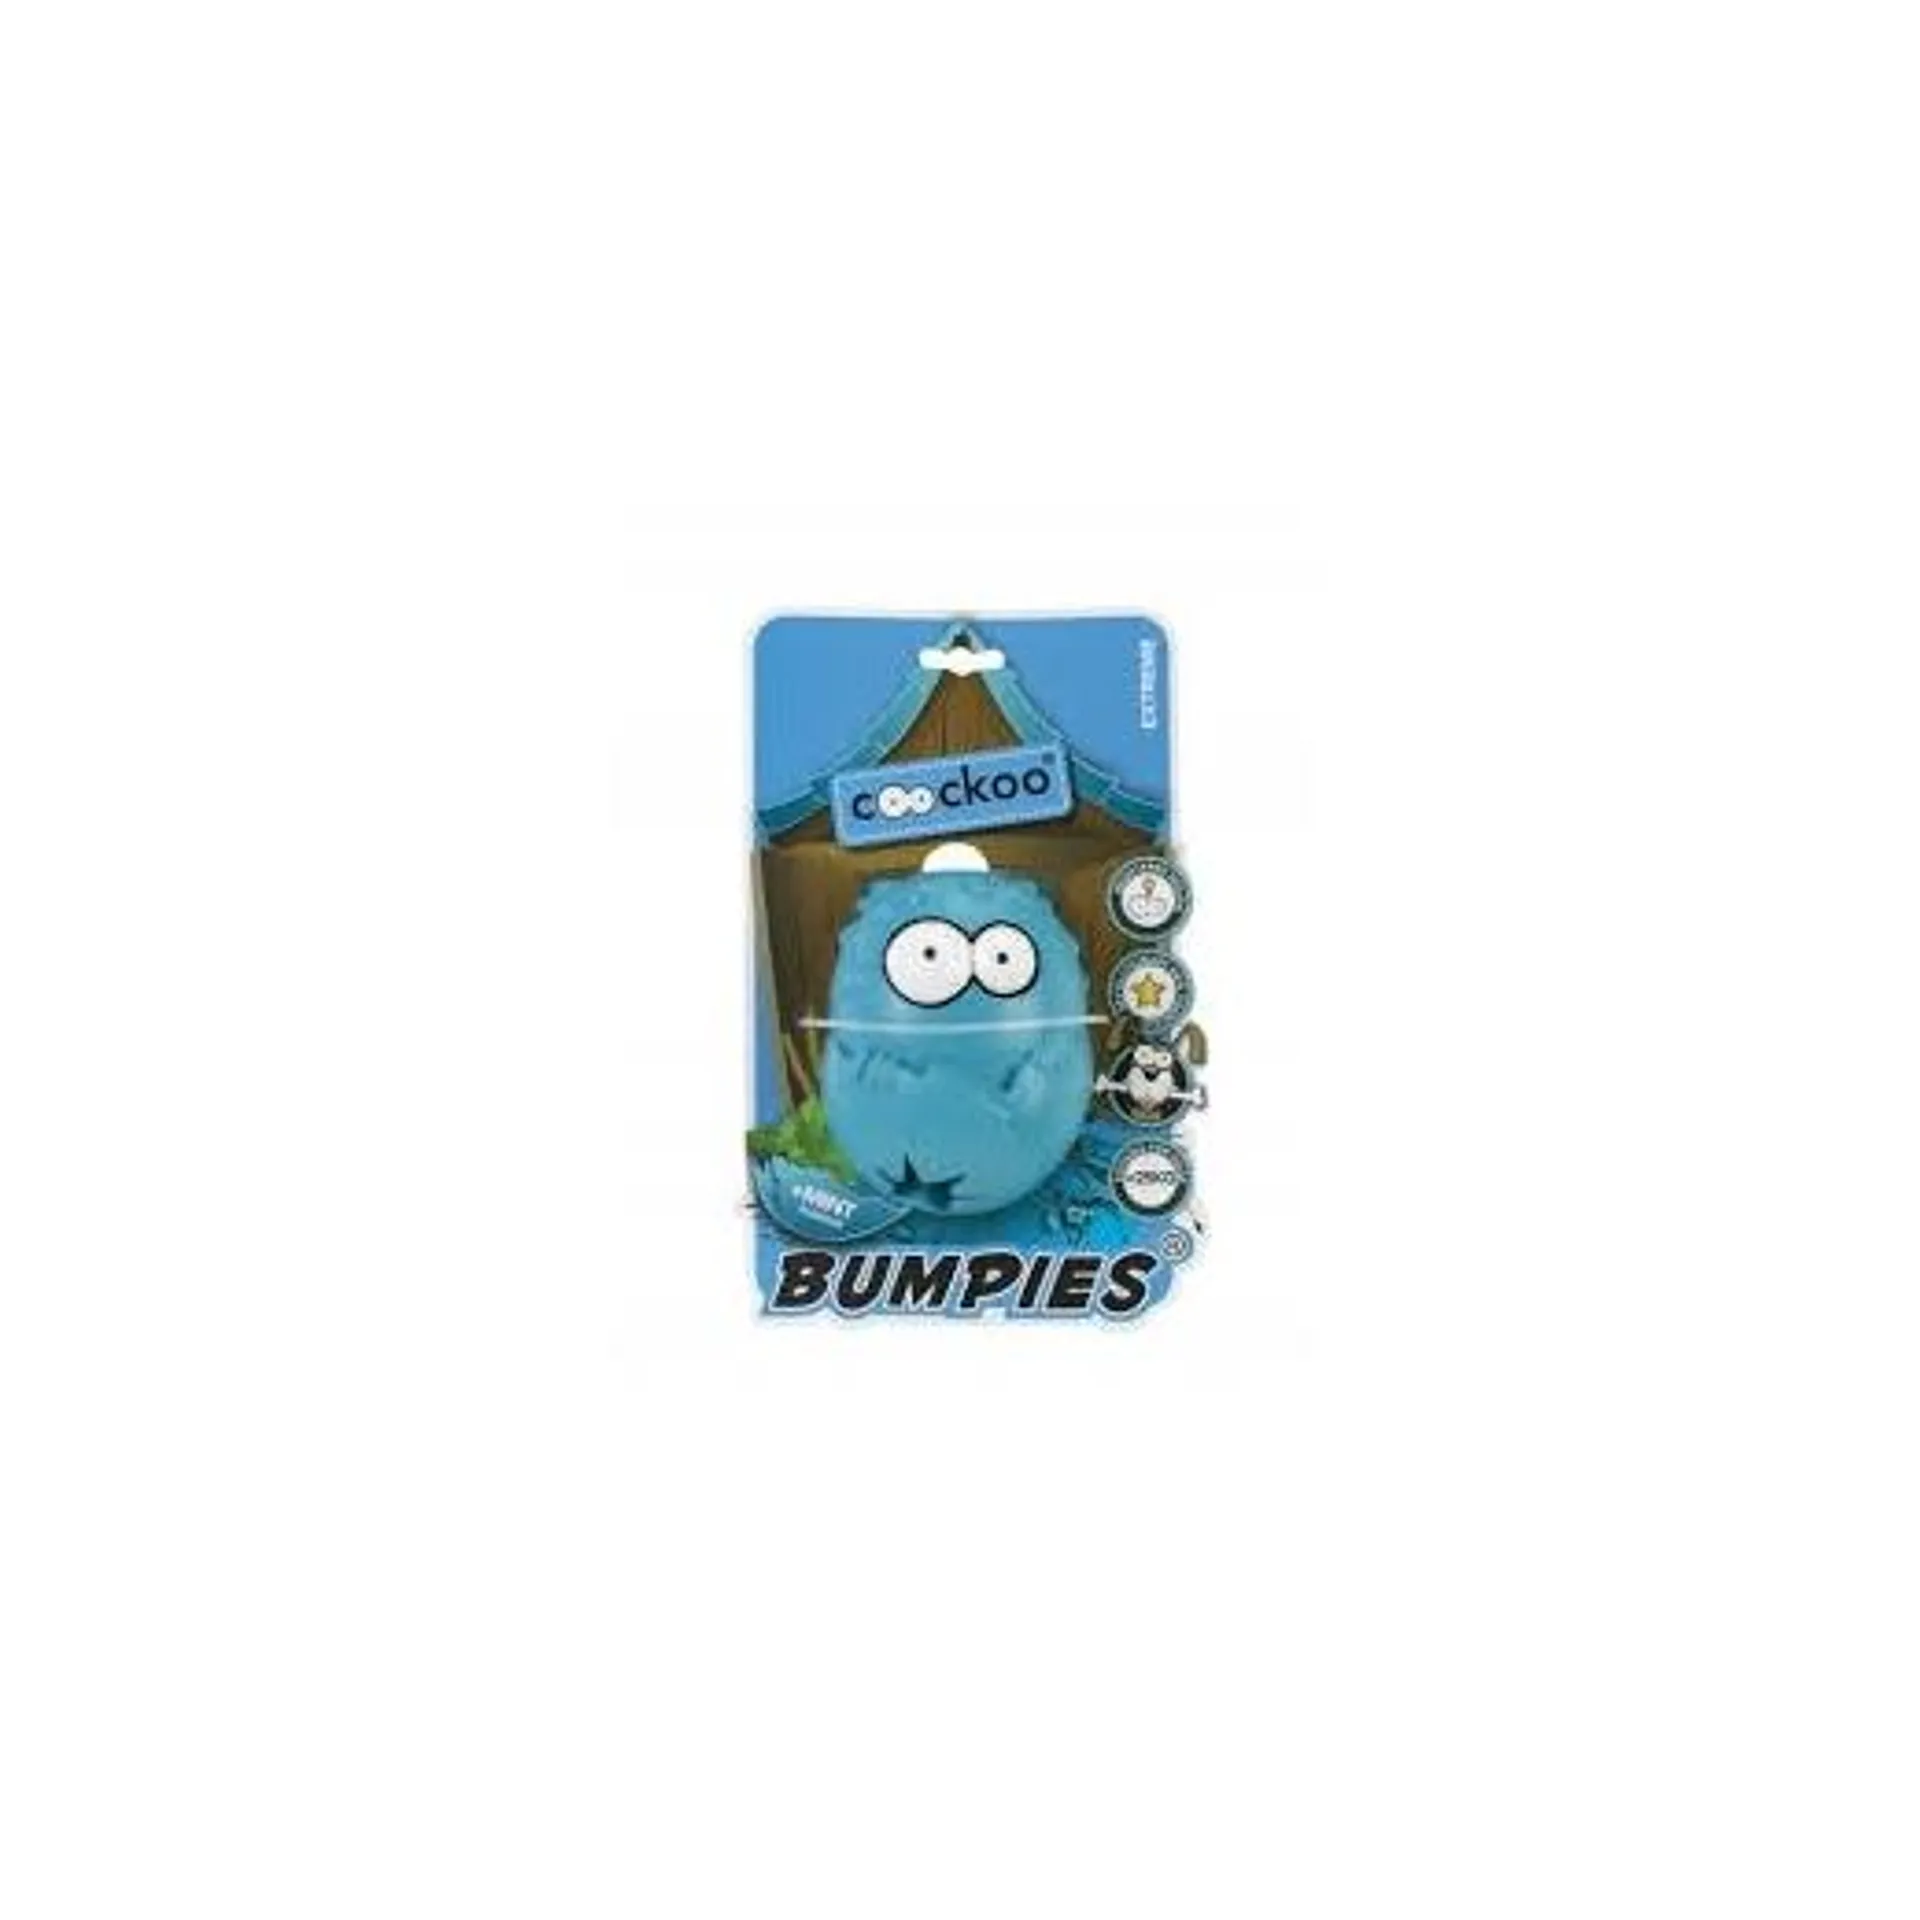 COOCKOO BUMPIES EXTREME BLUE +27KG CARIBBEAN-BLUE